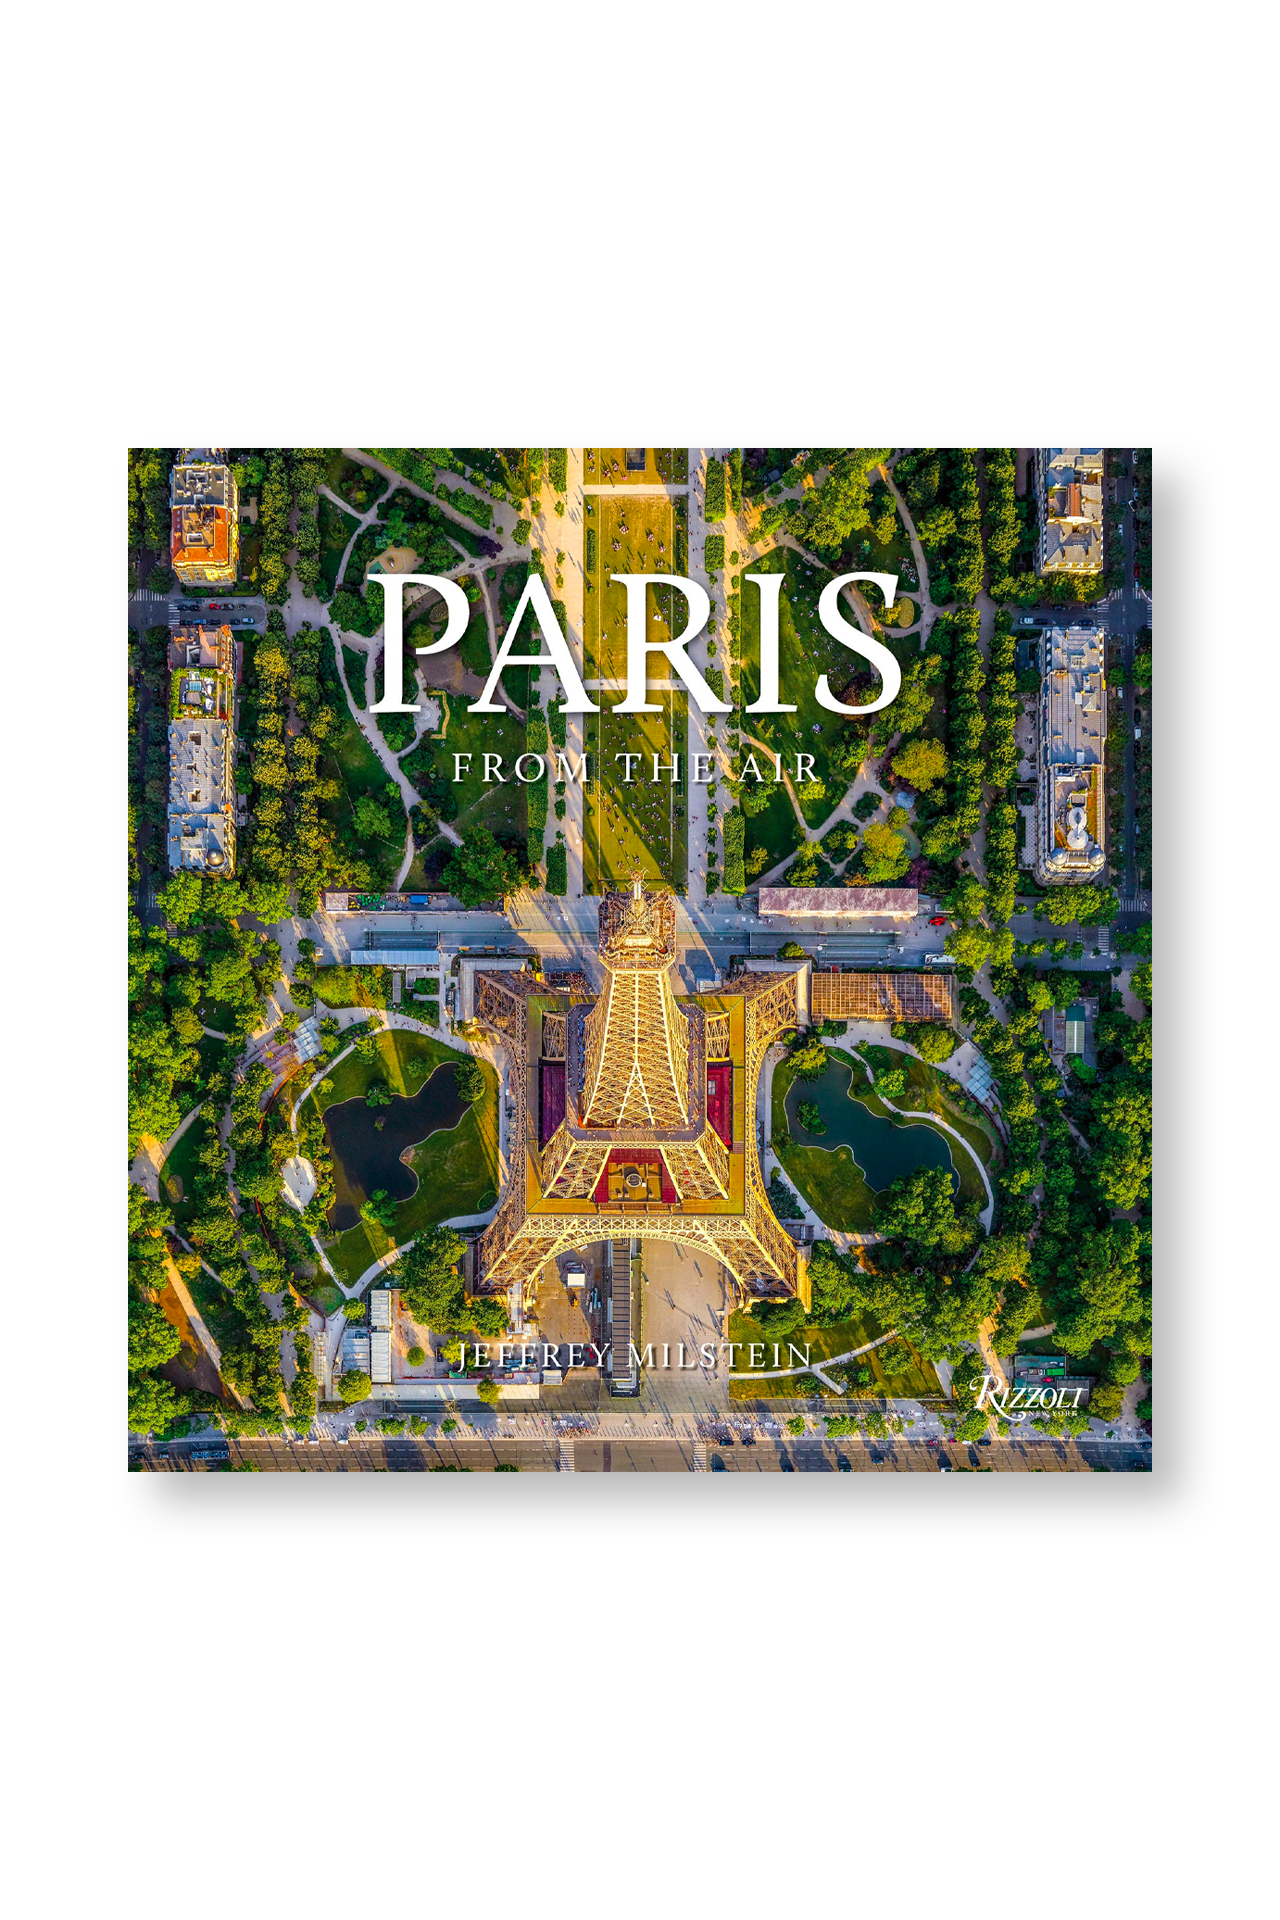 Rizzoli Paris: From the Air Book Front Cover Image (6550987243635)